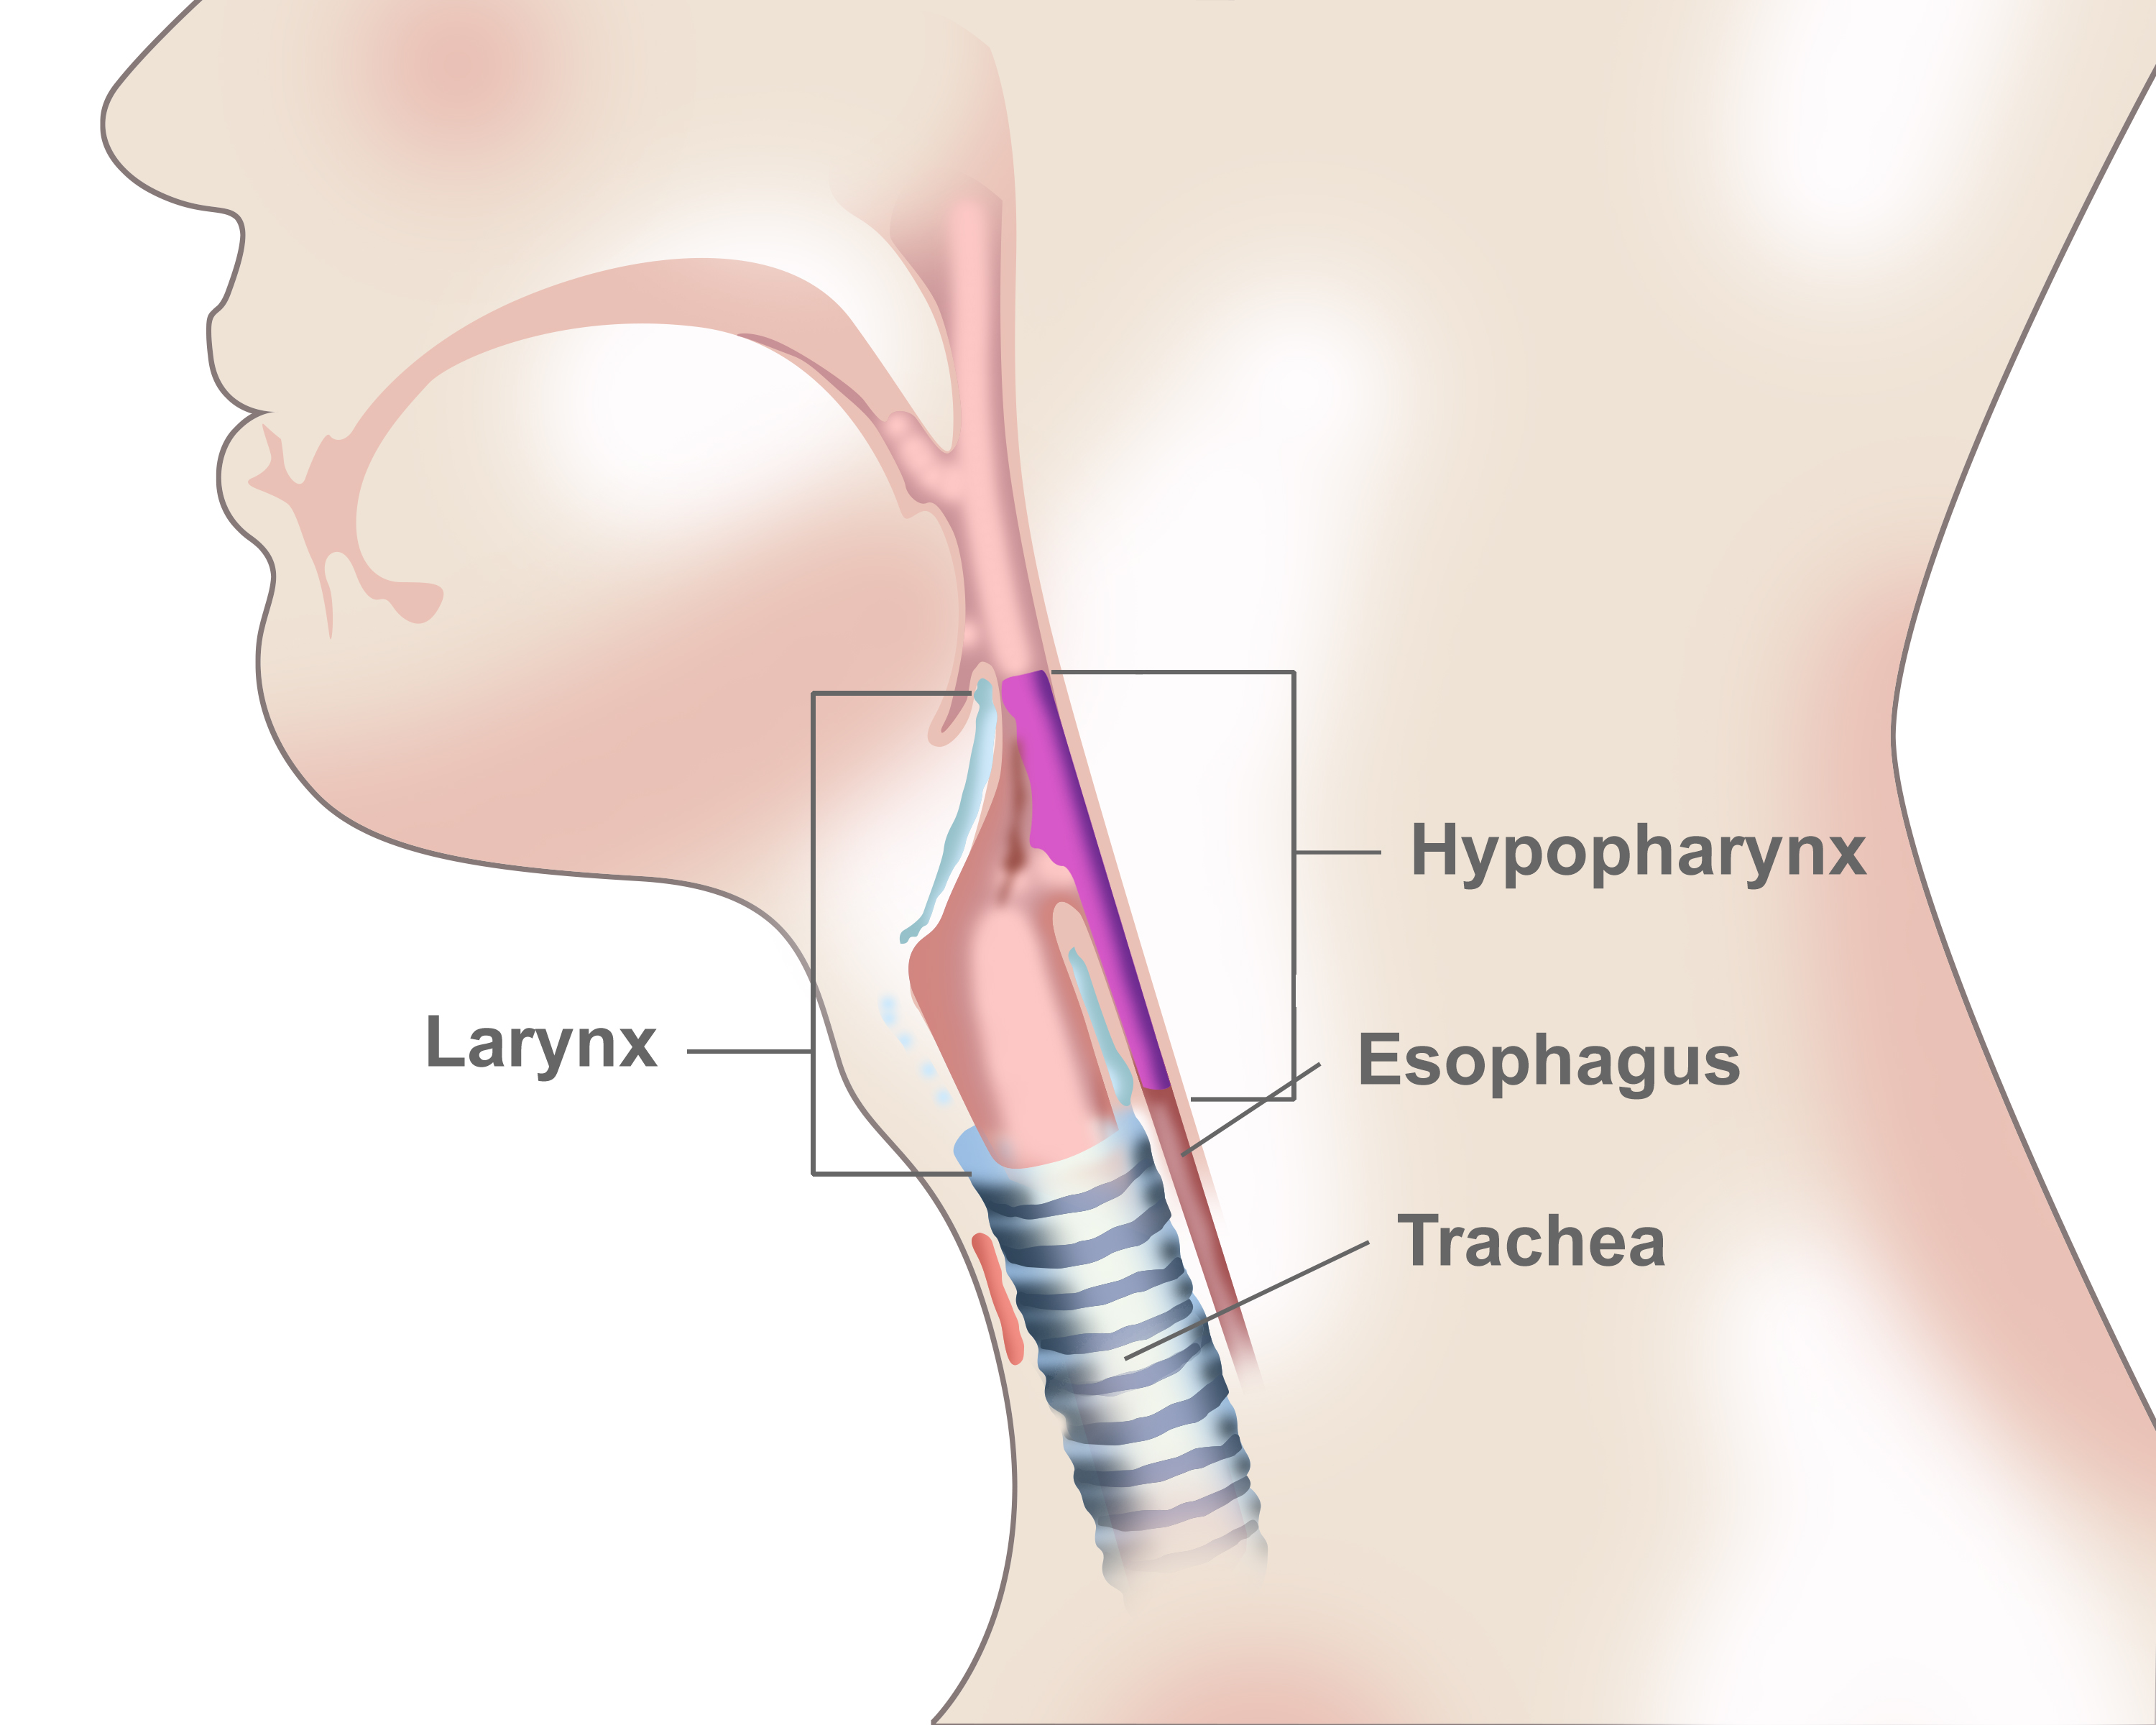 Hypopharyngeal Cancer Overview